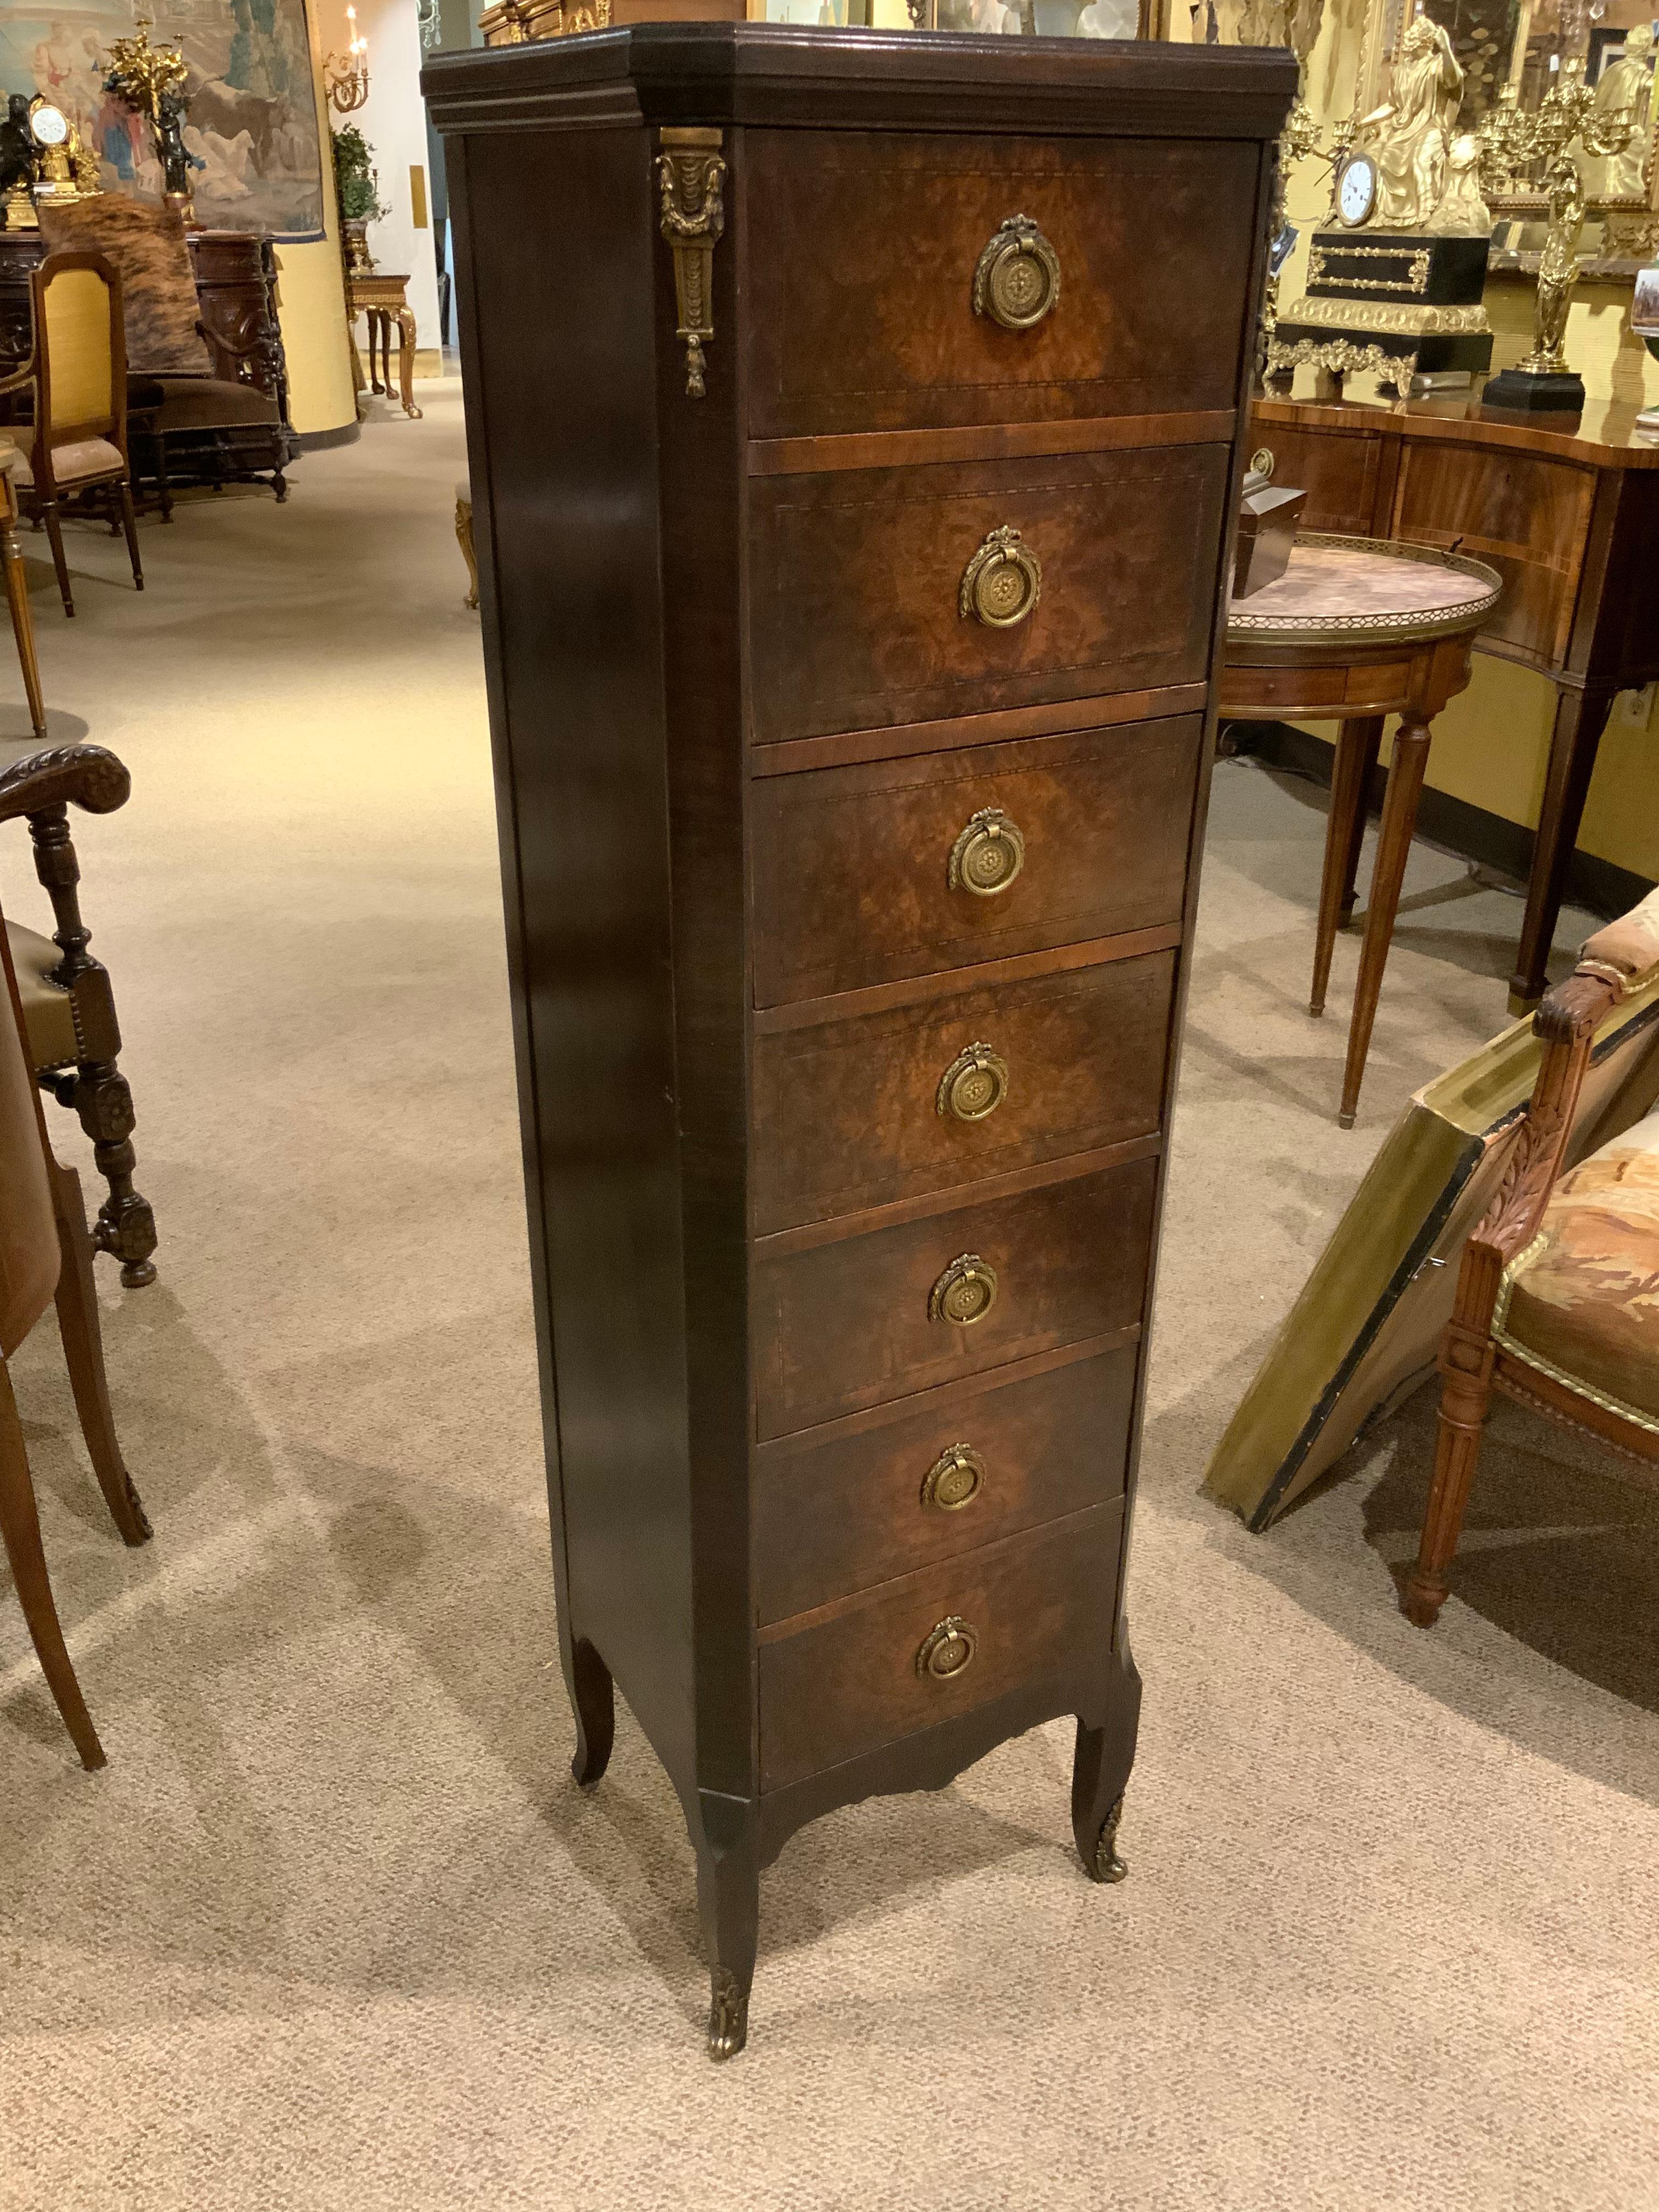 Lovely petite slender chest in burled walnut with multiple drawers for great storage.
Gilt bronze mounts with sabots at the feet.